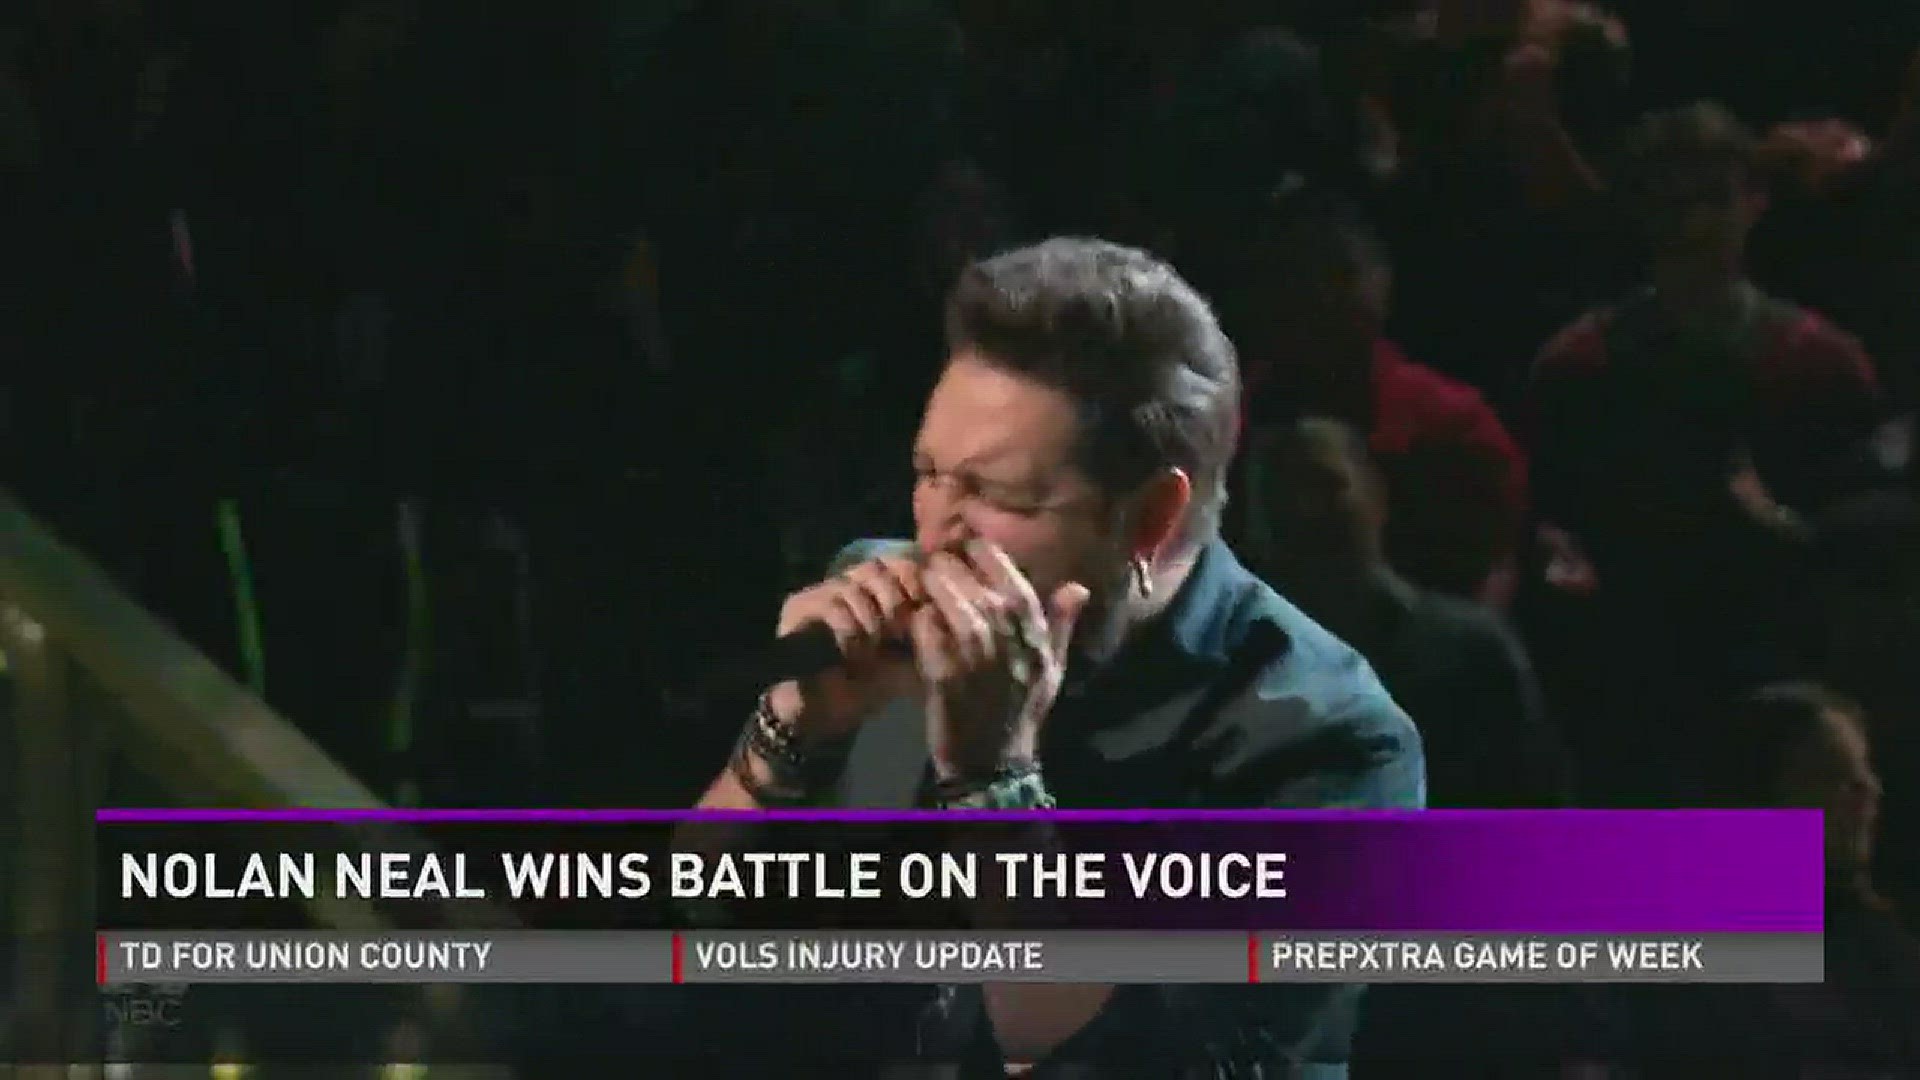 Oct. 17, 2016: Nashville native Nolan Neal won his knockout round on NBC's "The Voice" Monday to stay in the competition.